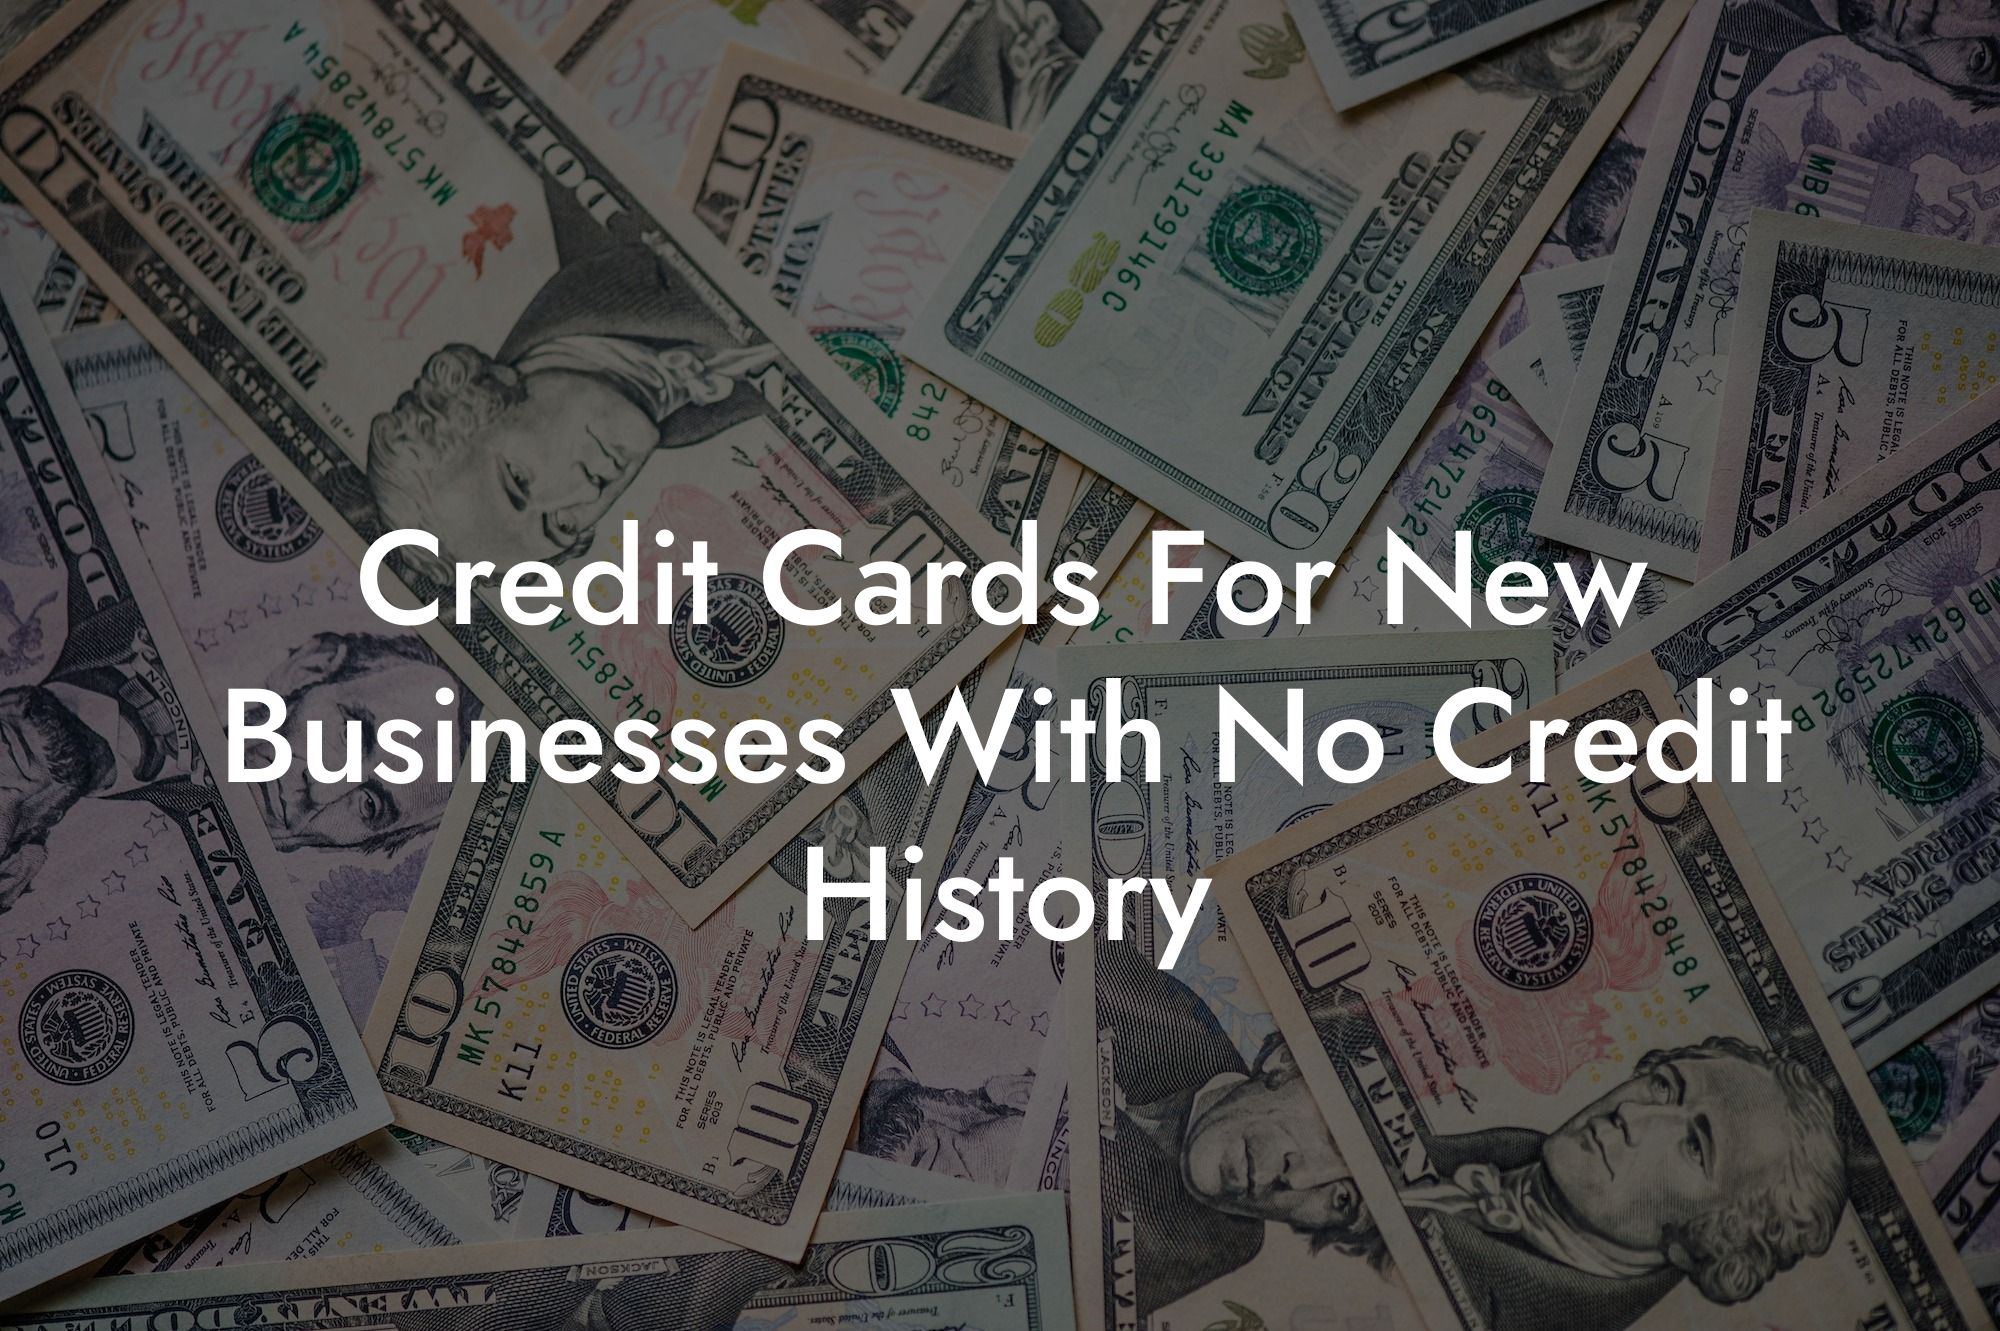 Credit Cards For New Businesses With No Credit History